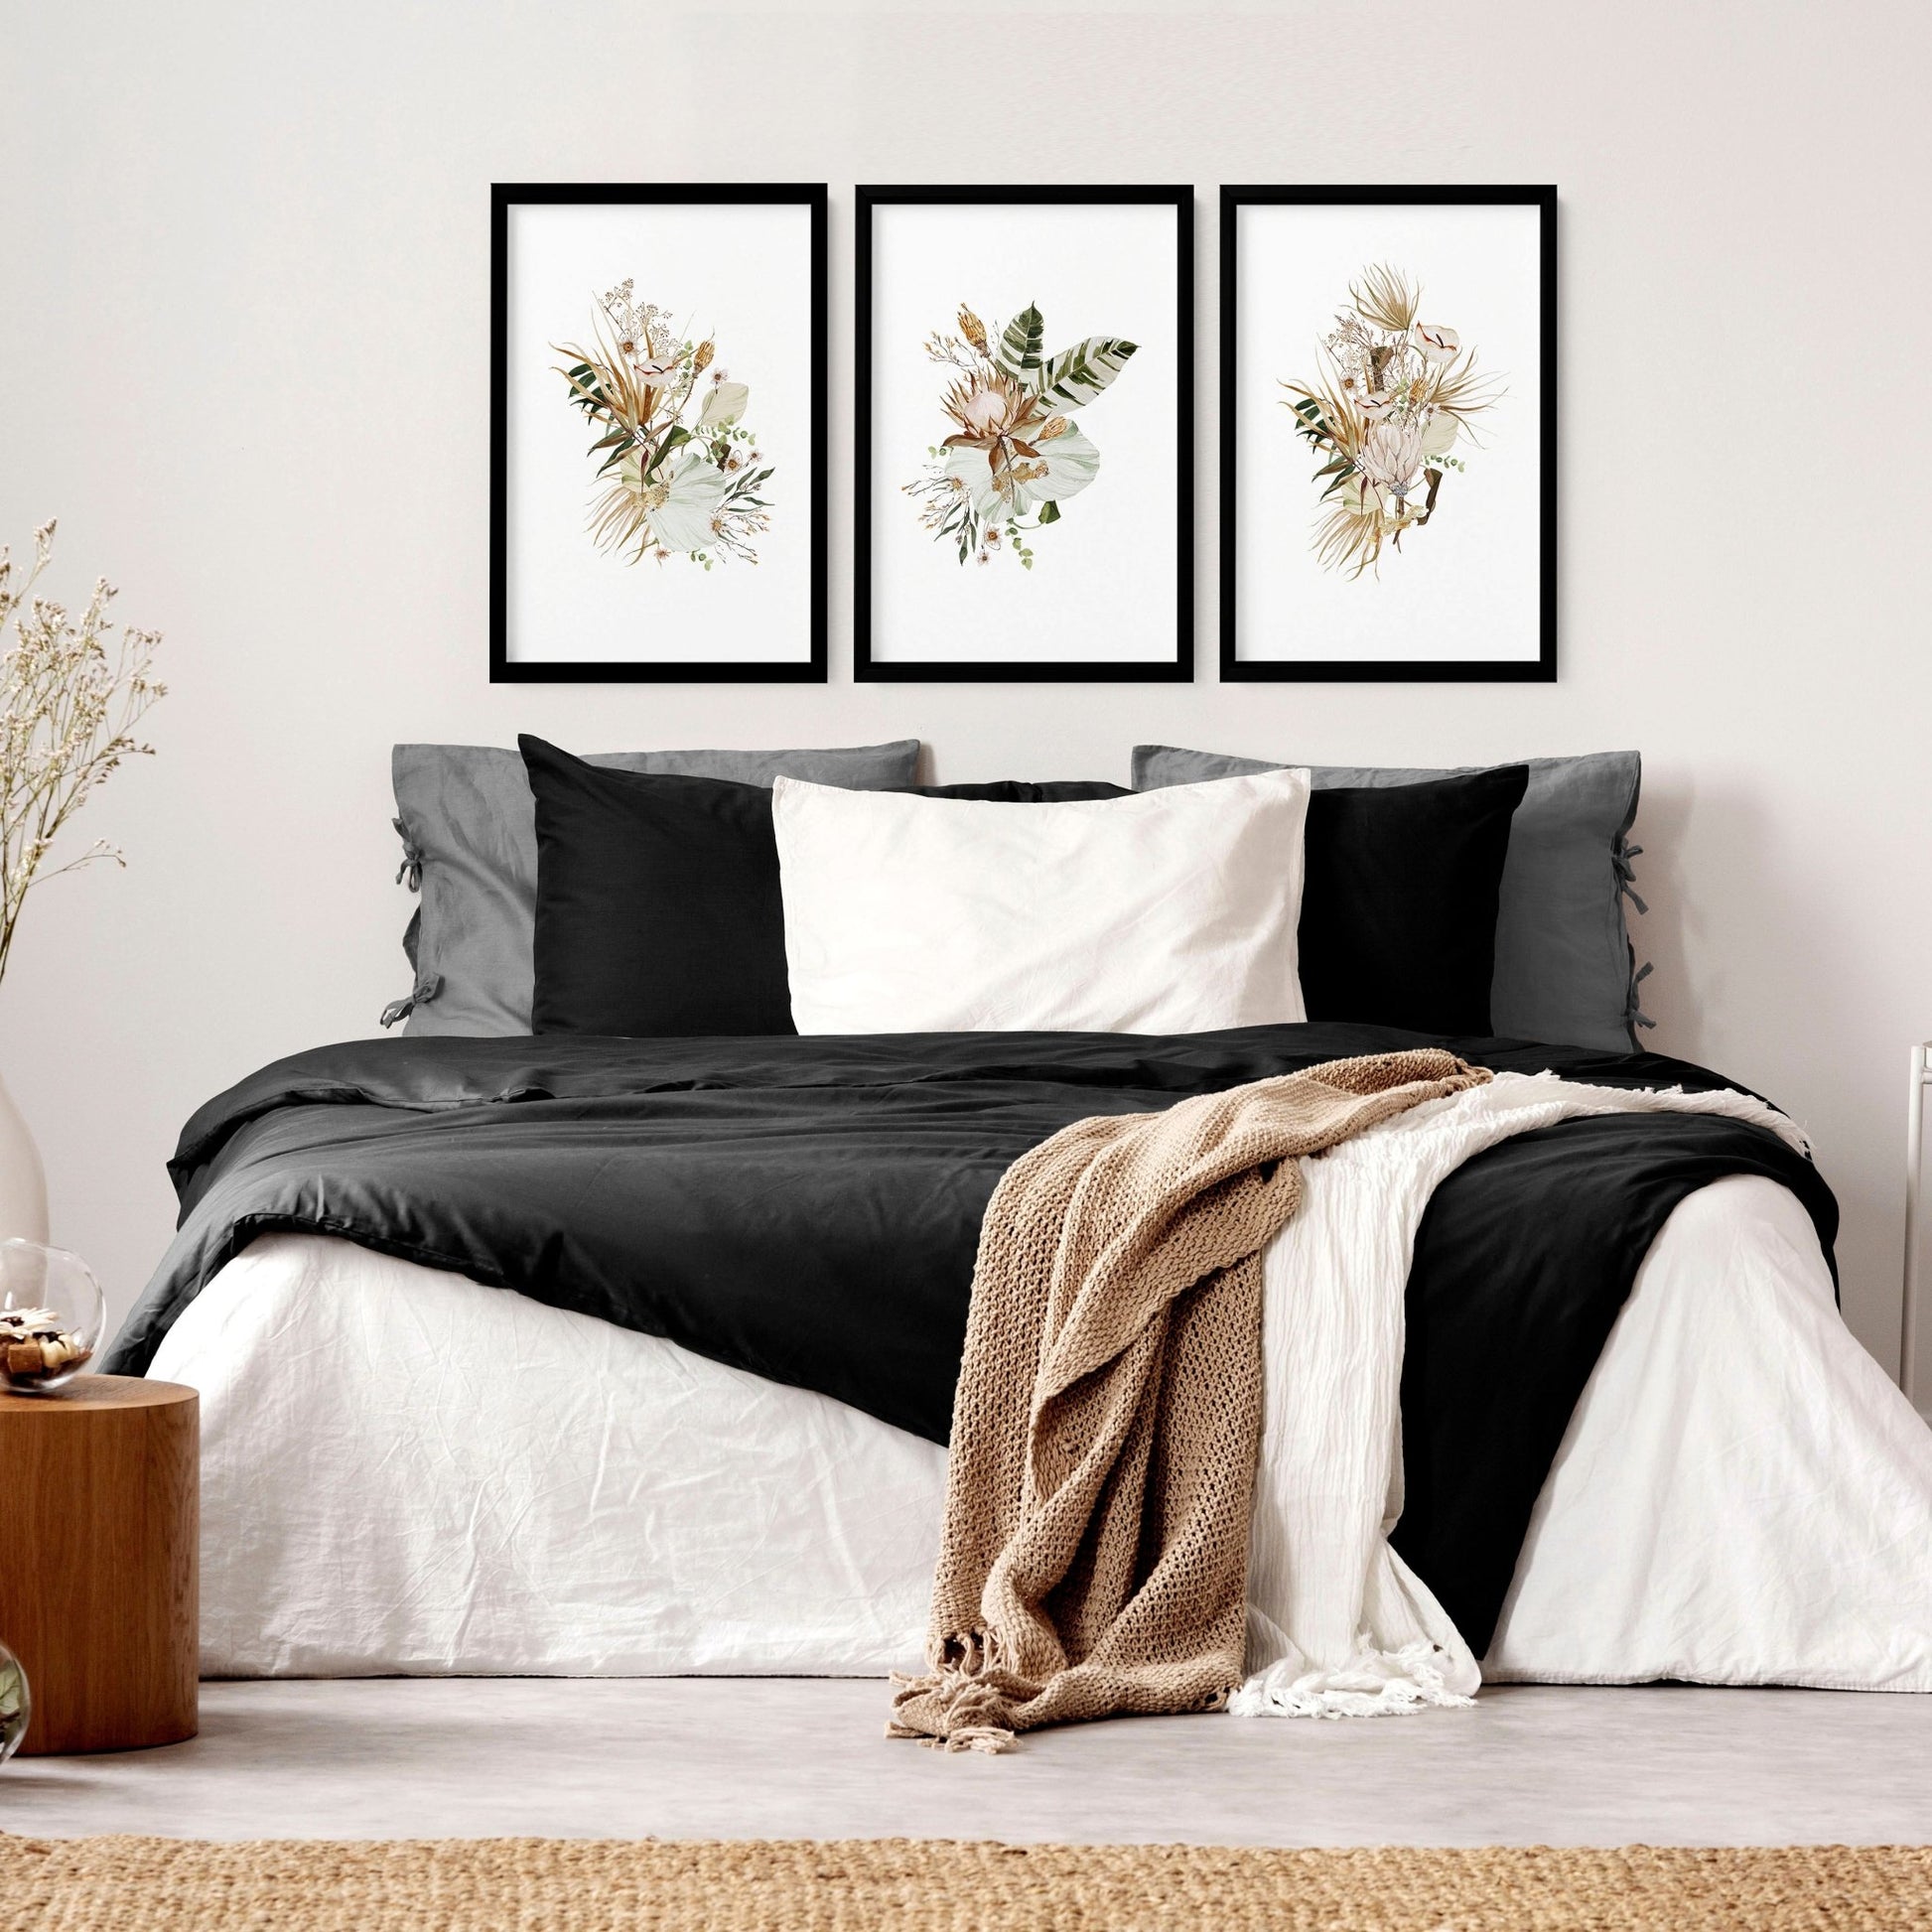 Wall decor country style | set of 3 wall art prints - About Wall Art